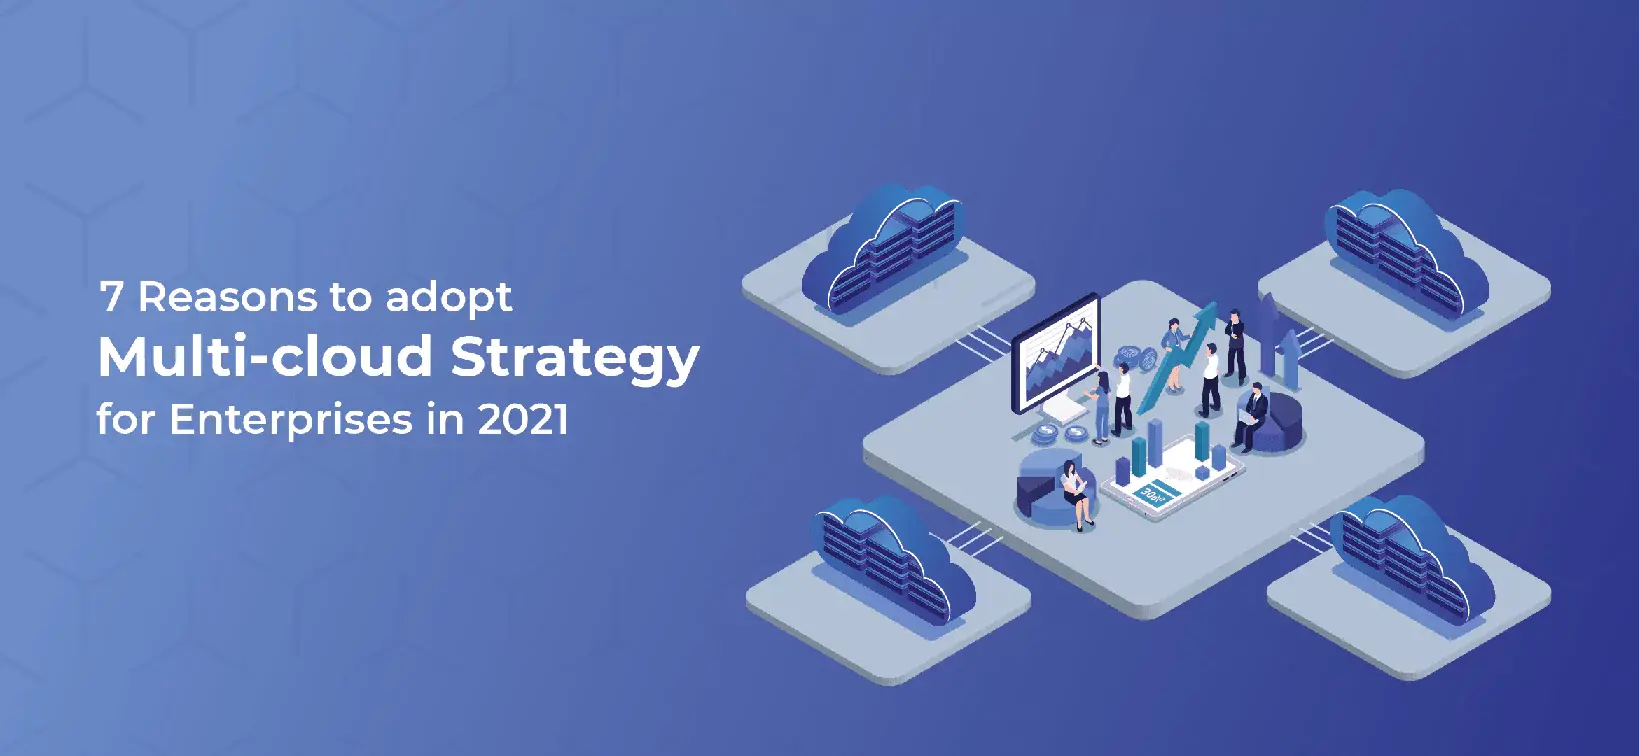 7 Reasons to Adopt Multi-Cloud Strategy for Enterprises in 2021